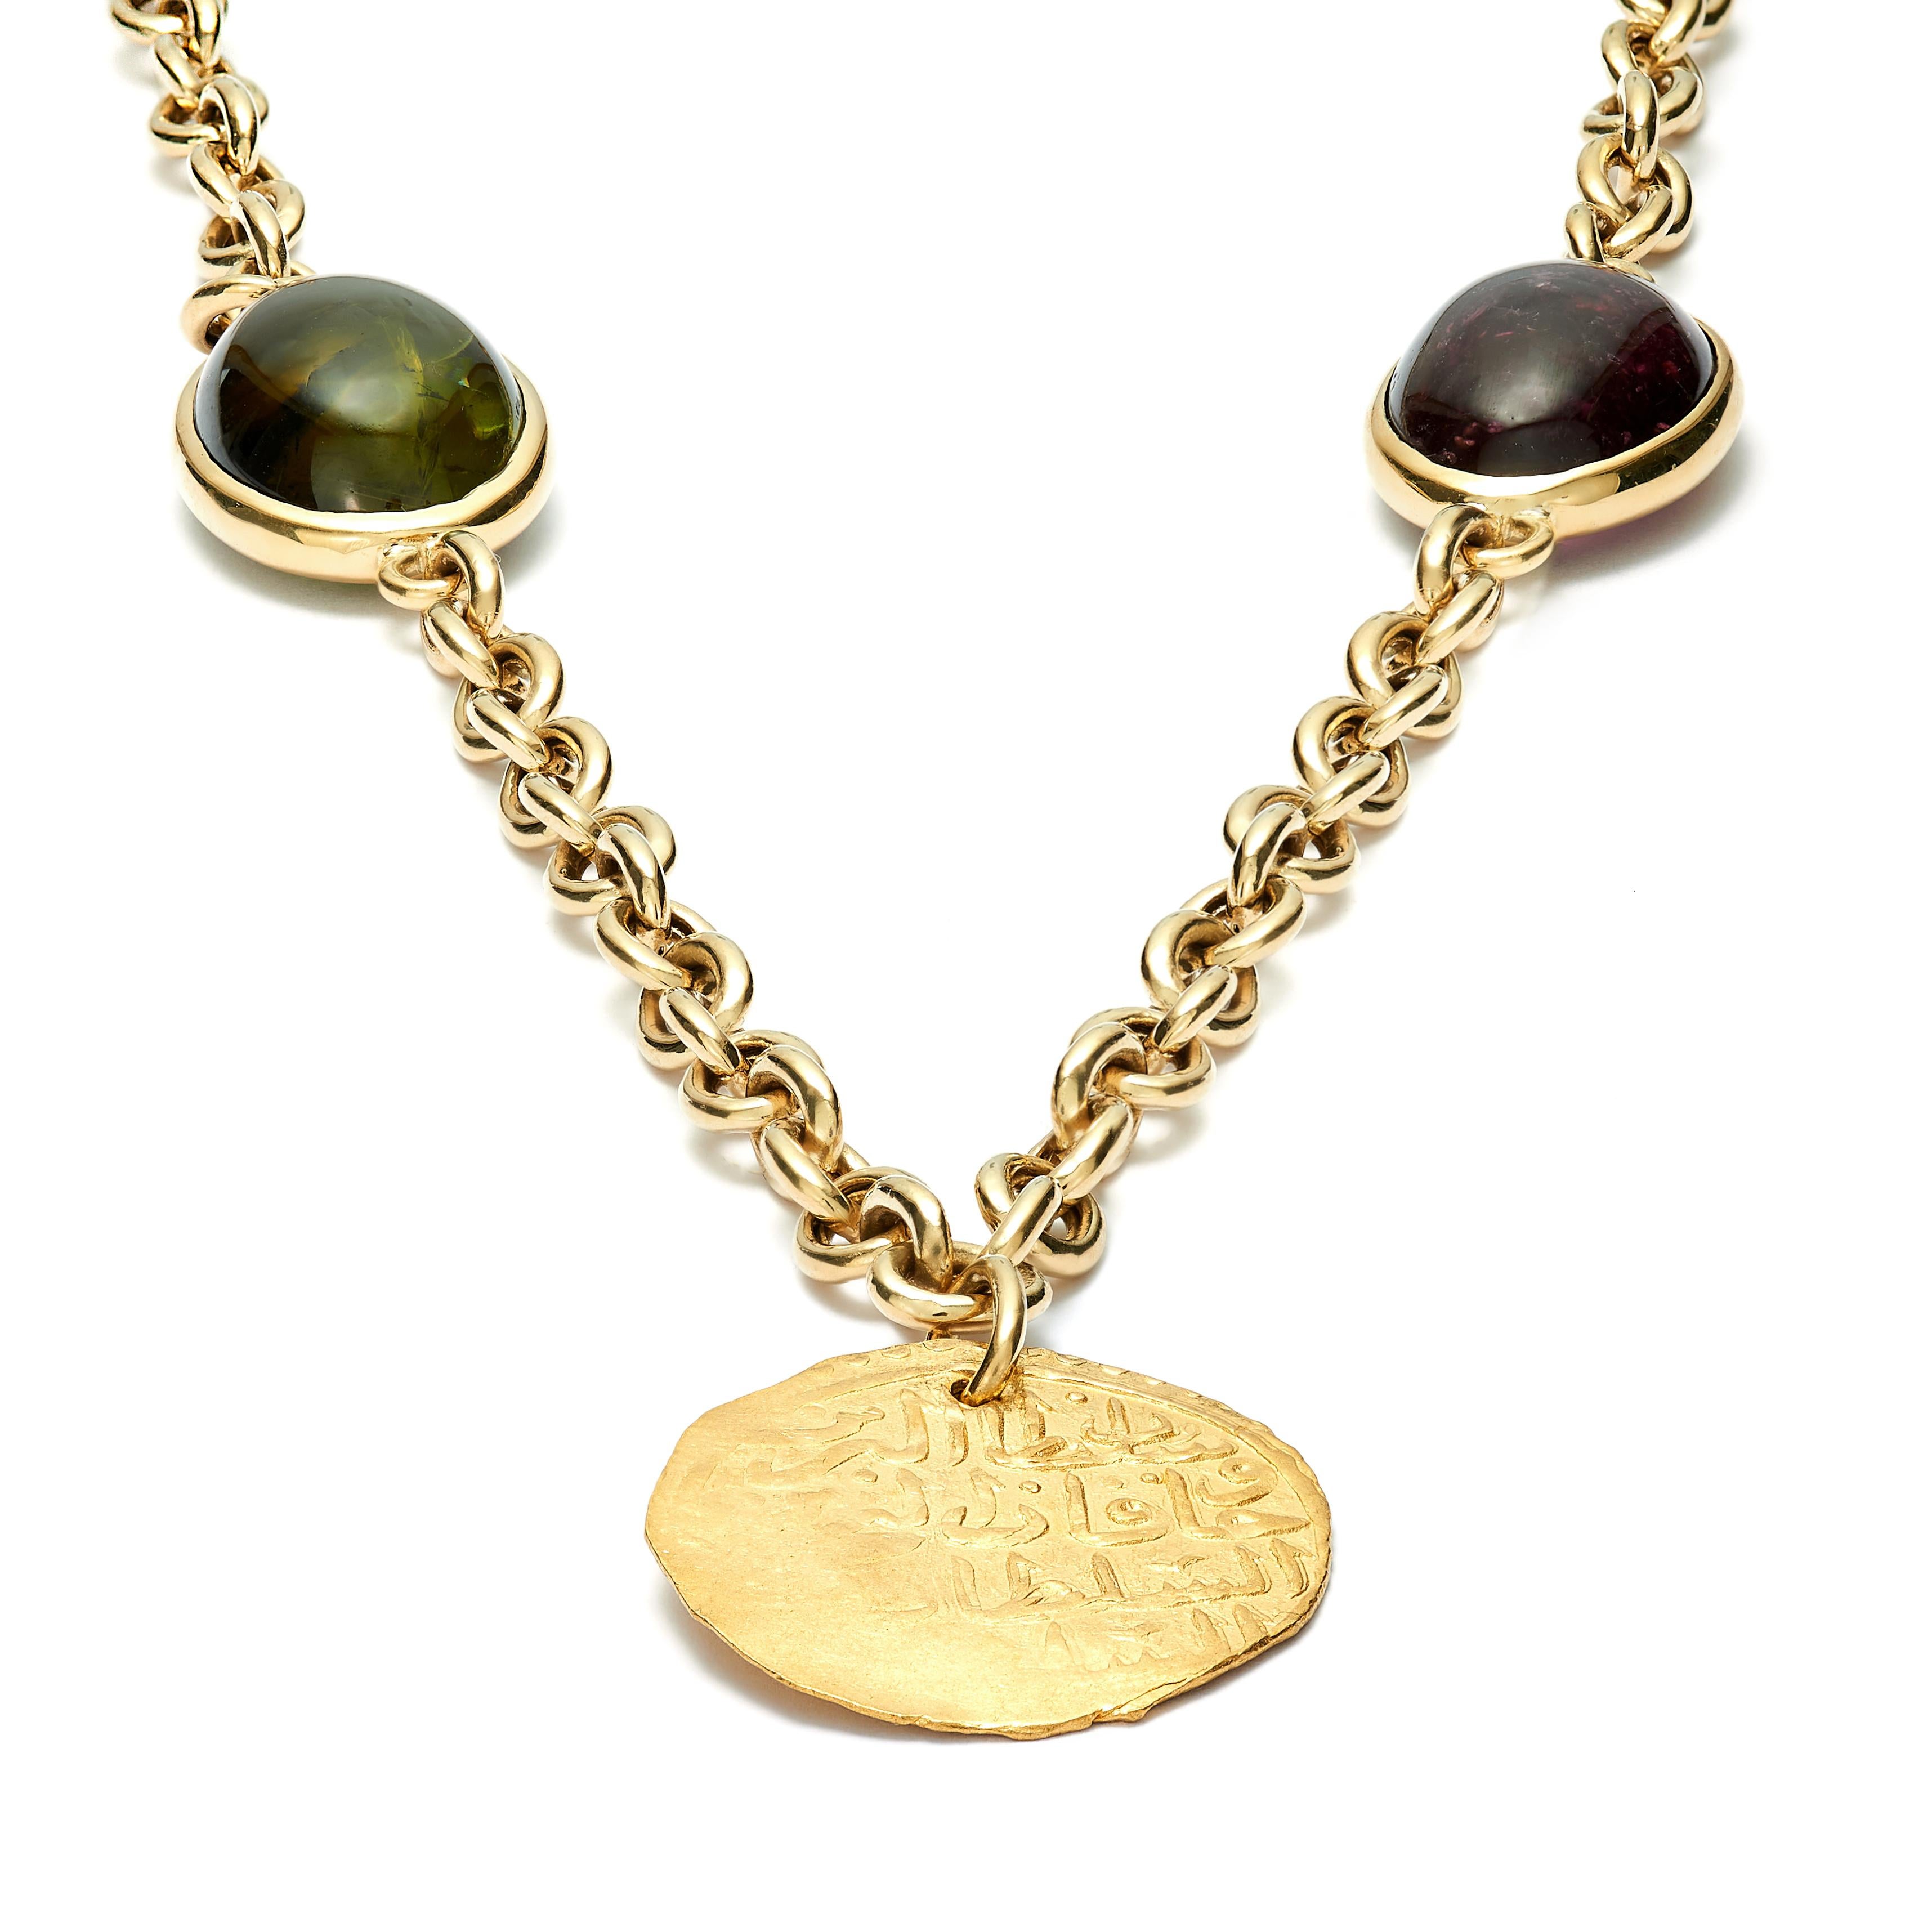 This DUBINI coin necklace from the 'Empires' collection features authentic coins from the Ottoman Empire of Mehmet IV (AH 1058-1099 / AD 1648-1687) AV Sultani, set in 18kt yellow gold with tourmaline and citrine cabochons.

DEPICTED ON THE